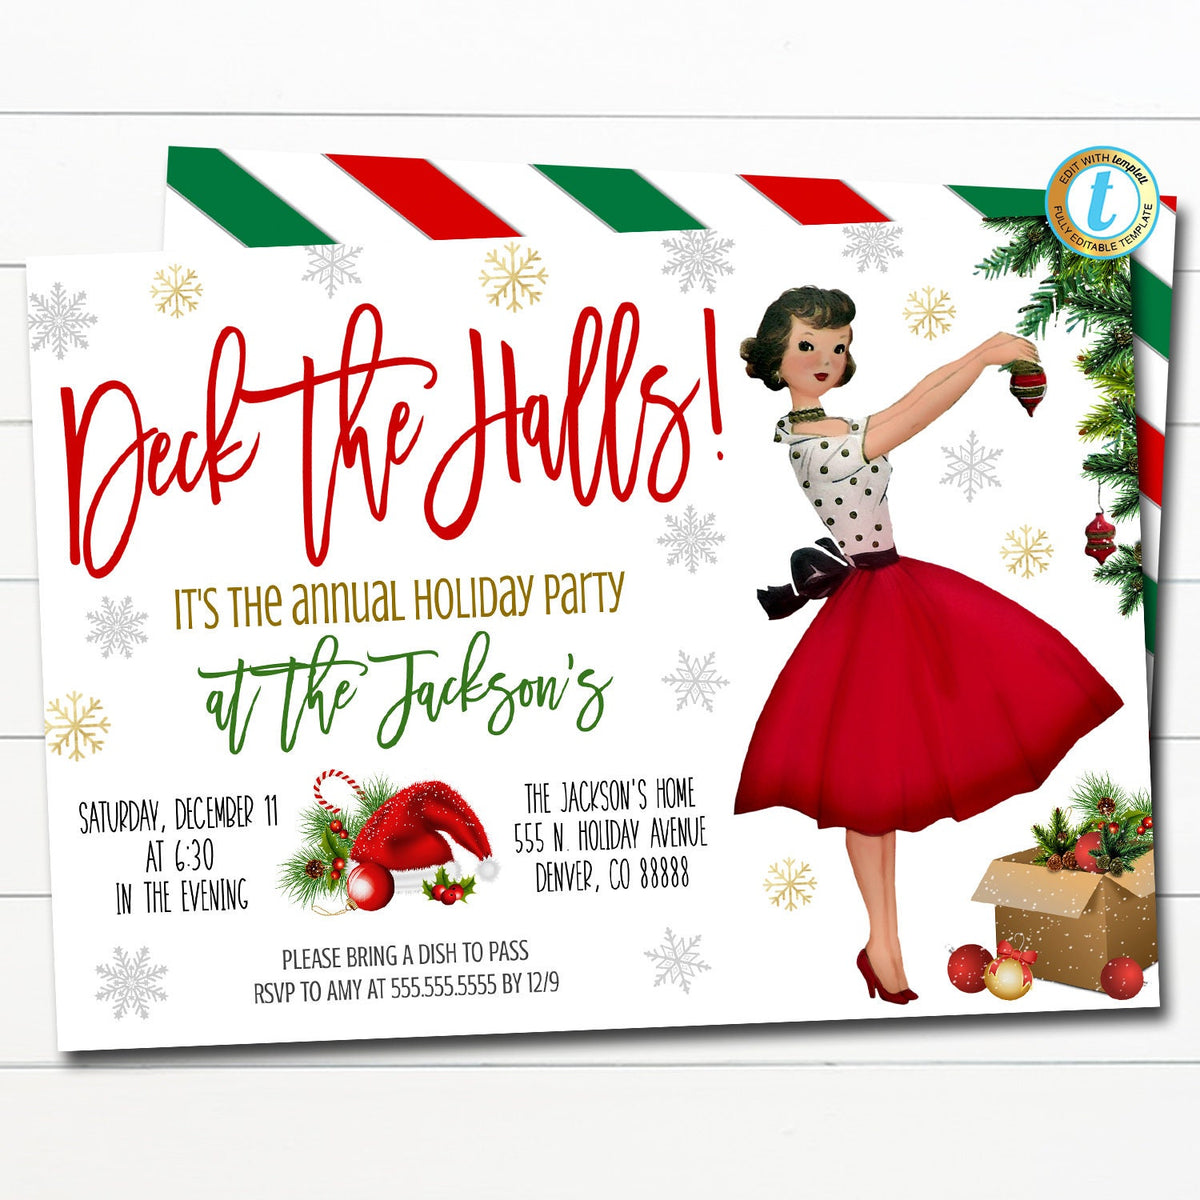 Classic Holiday Party Invitations, Christmas, New Year's